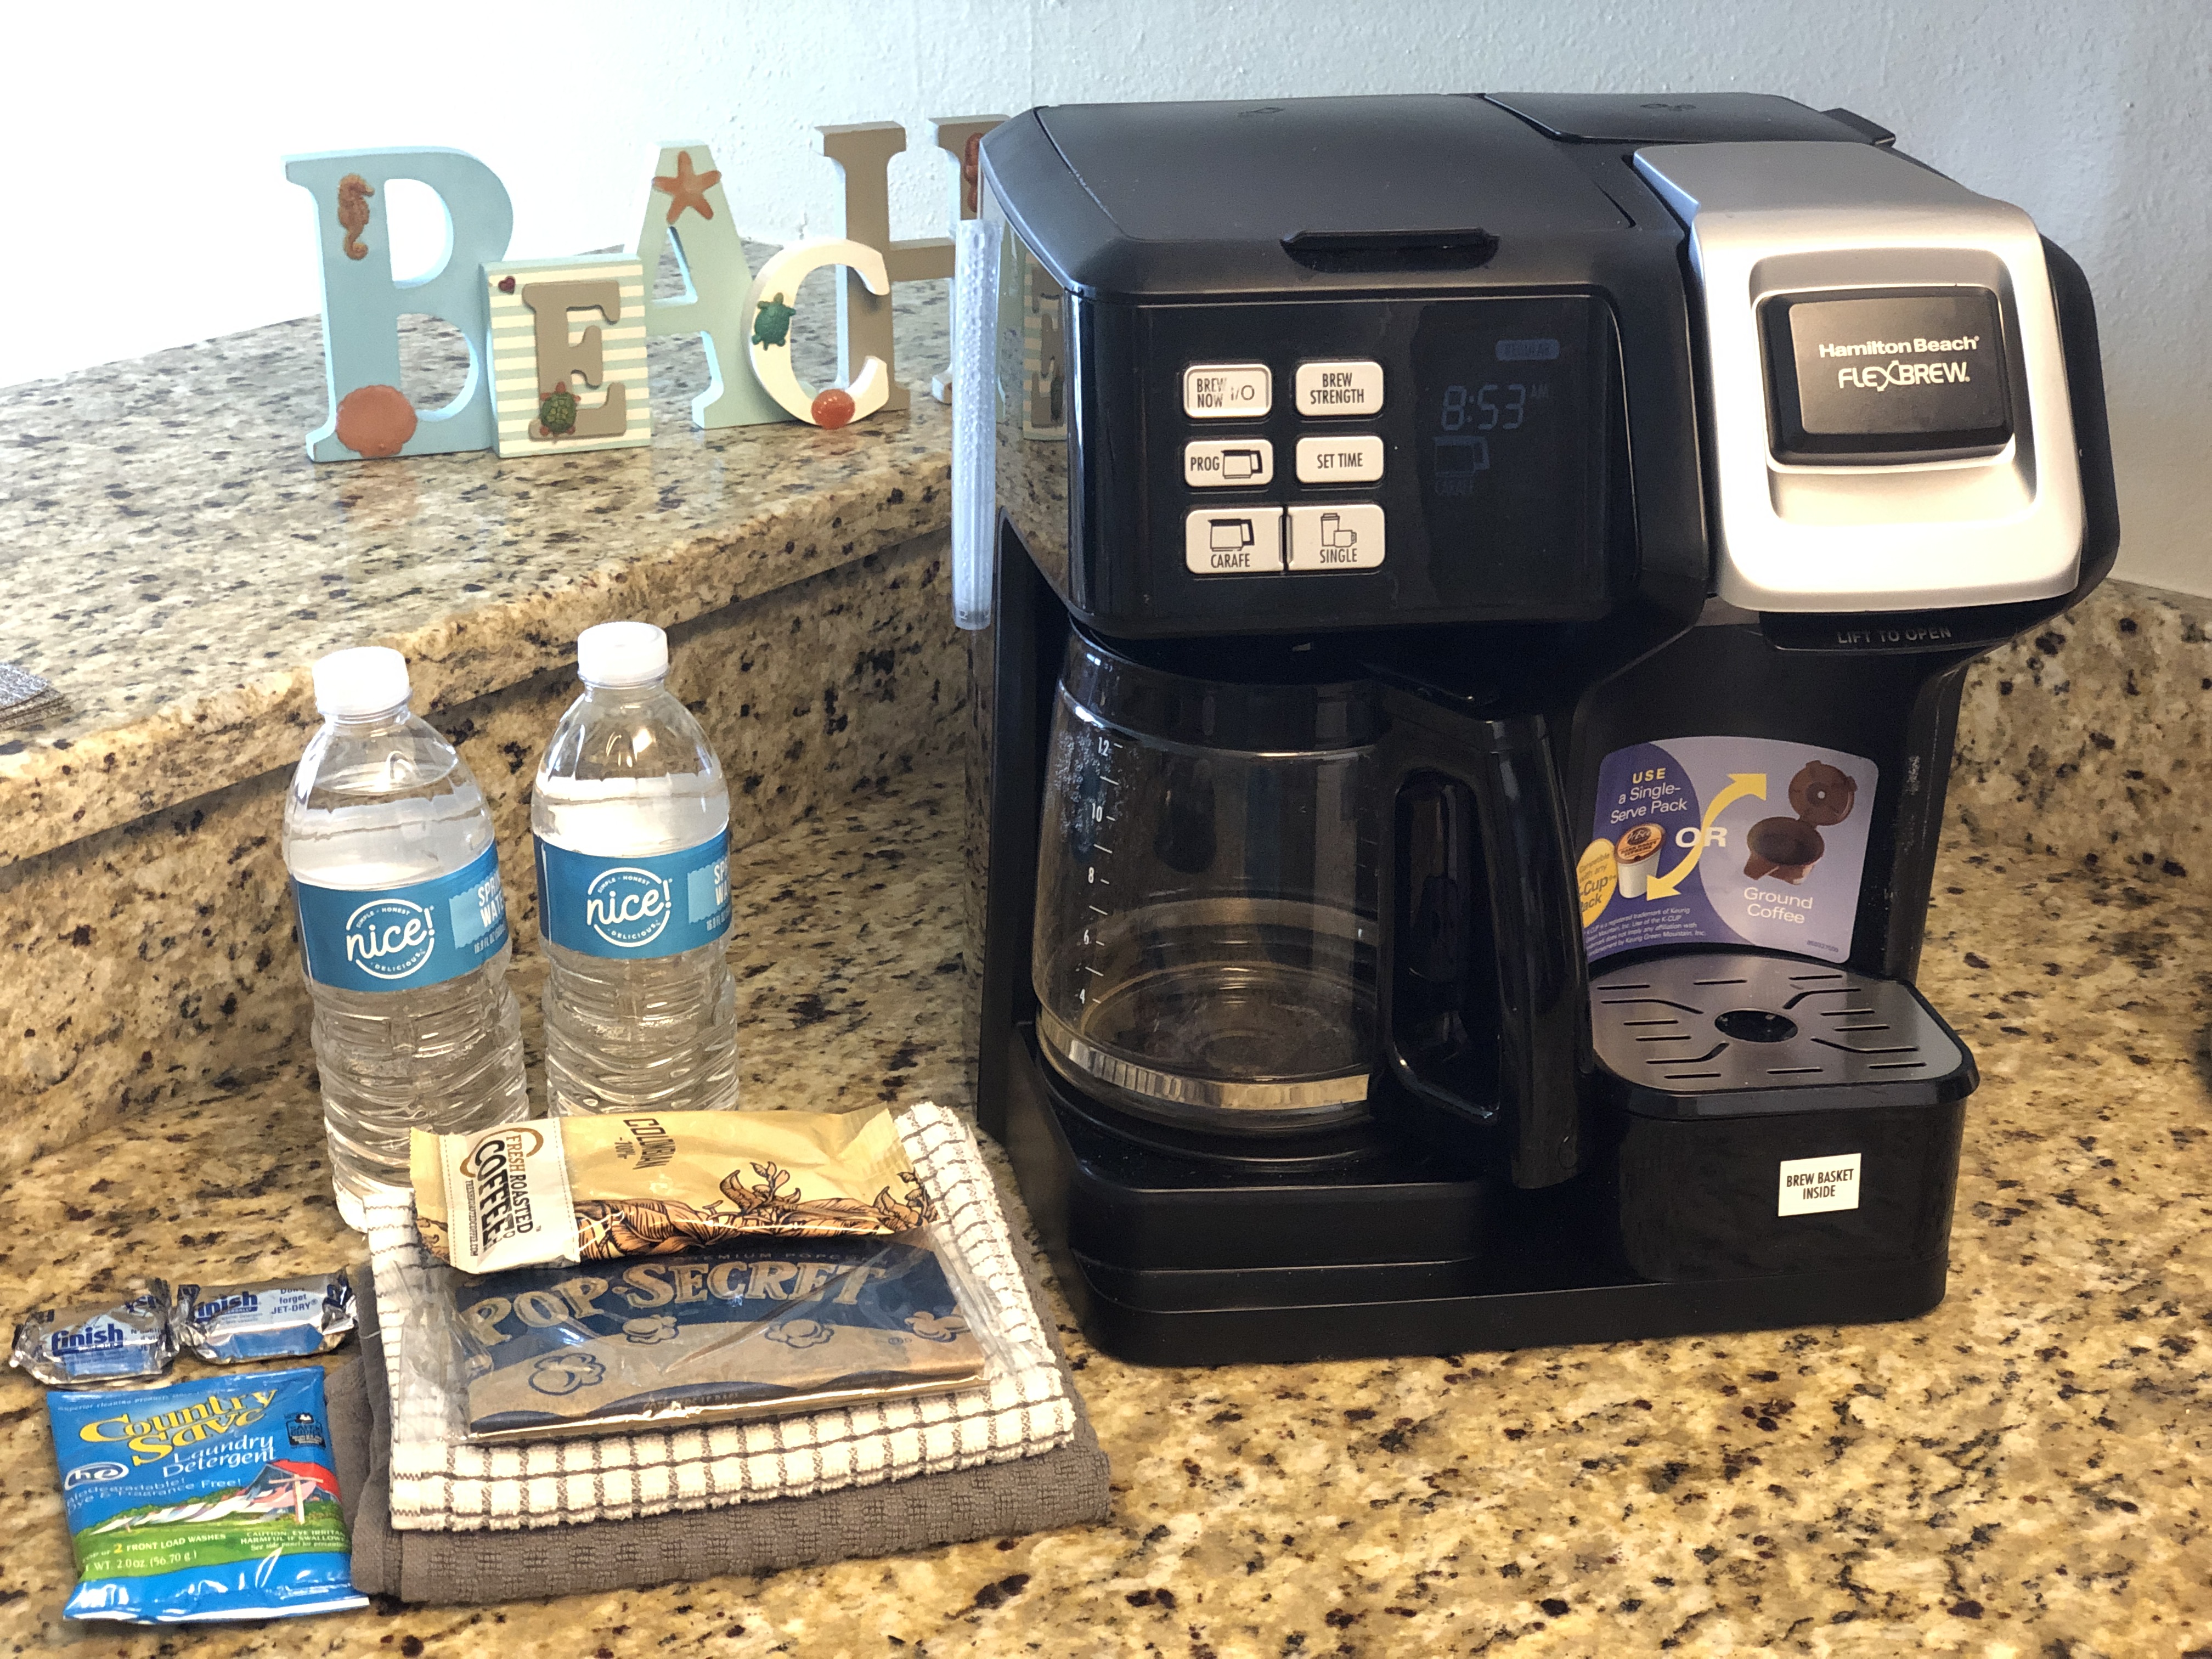 Coffee machine and initial supplies